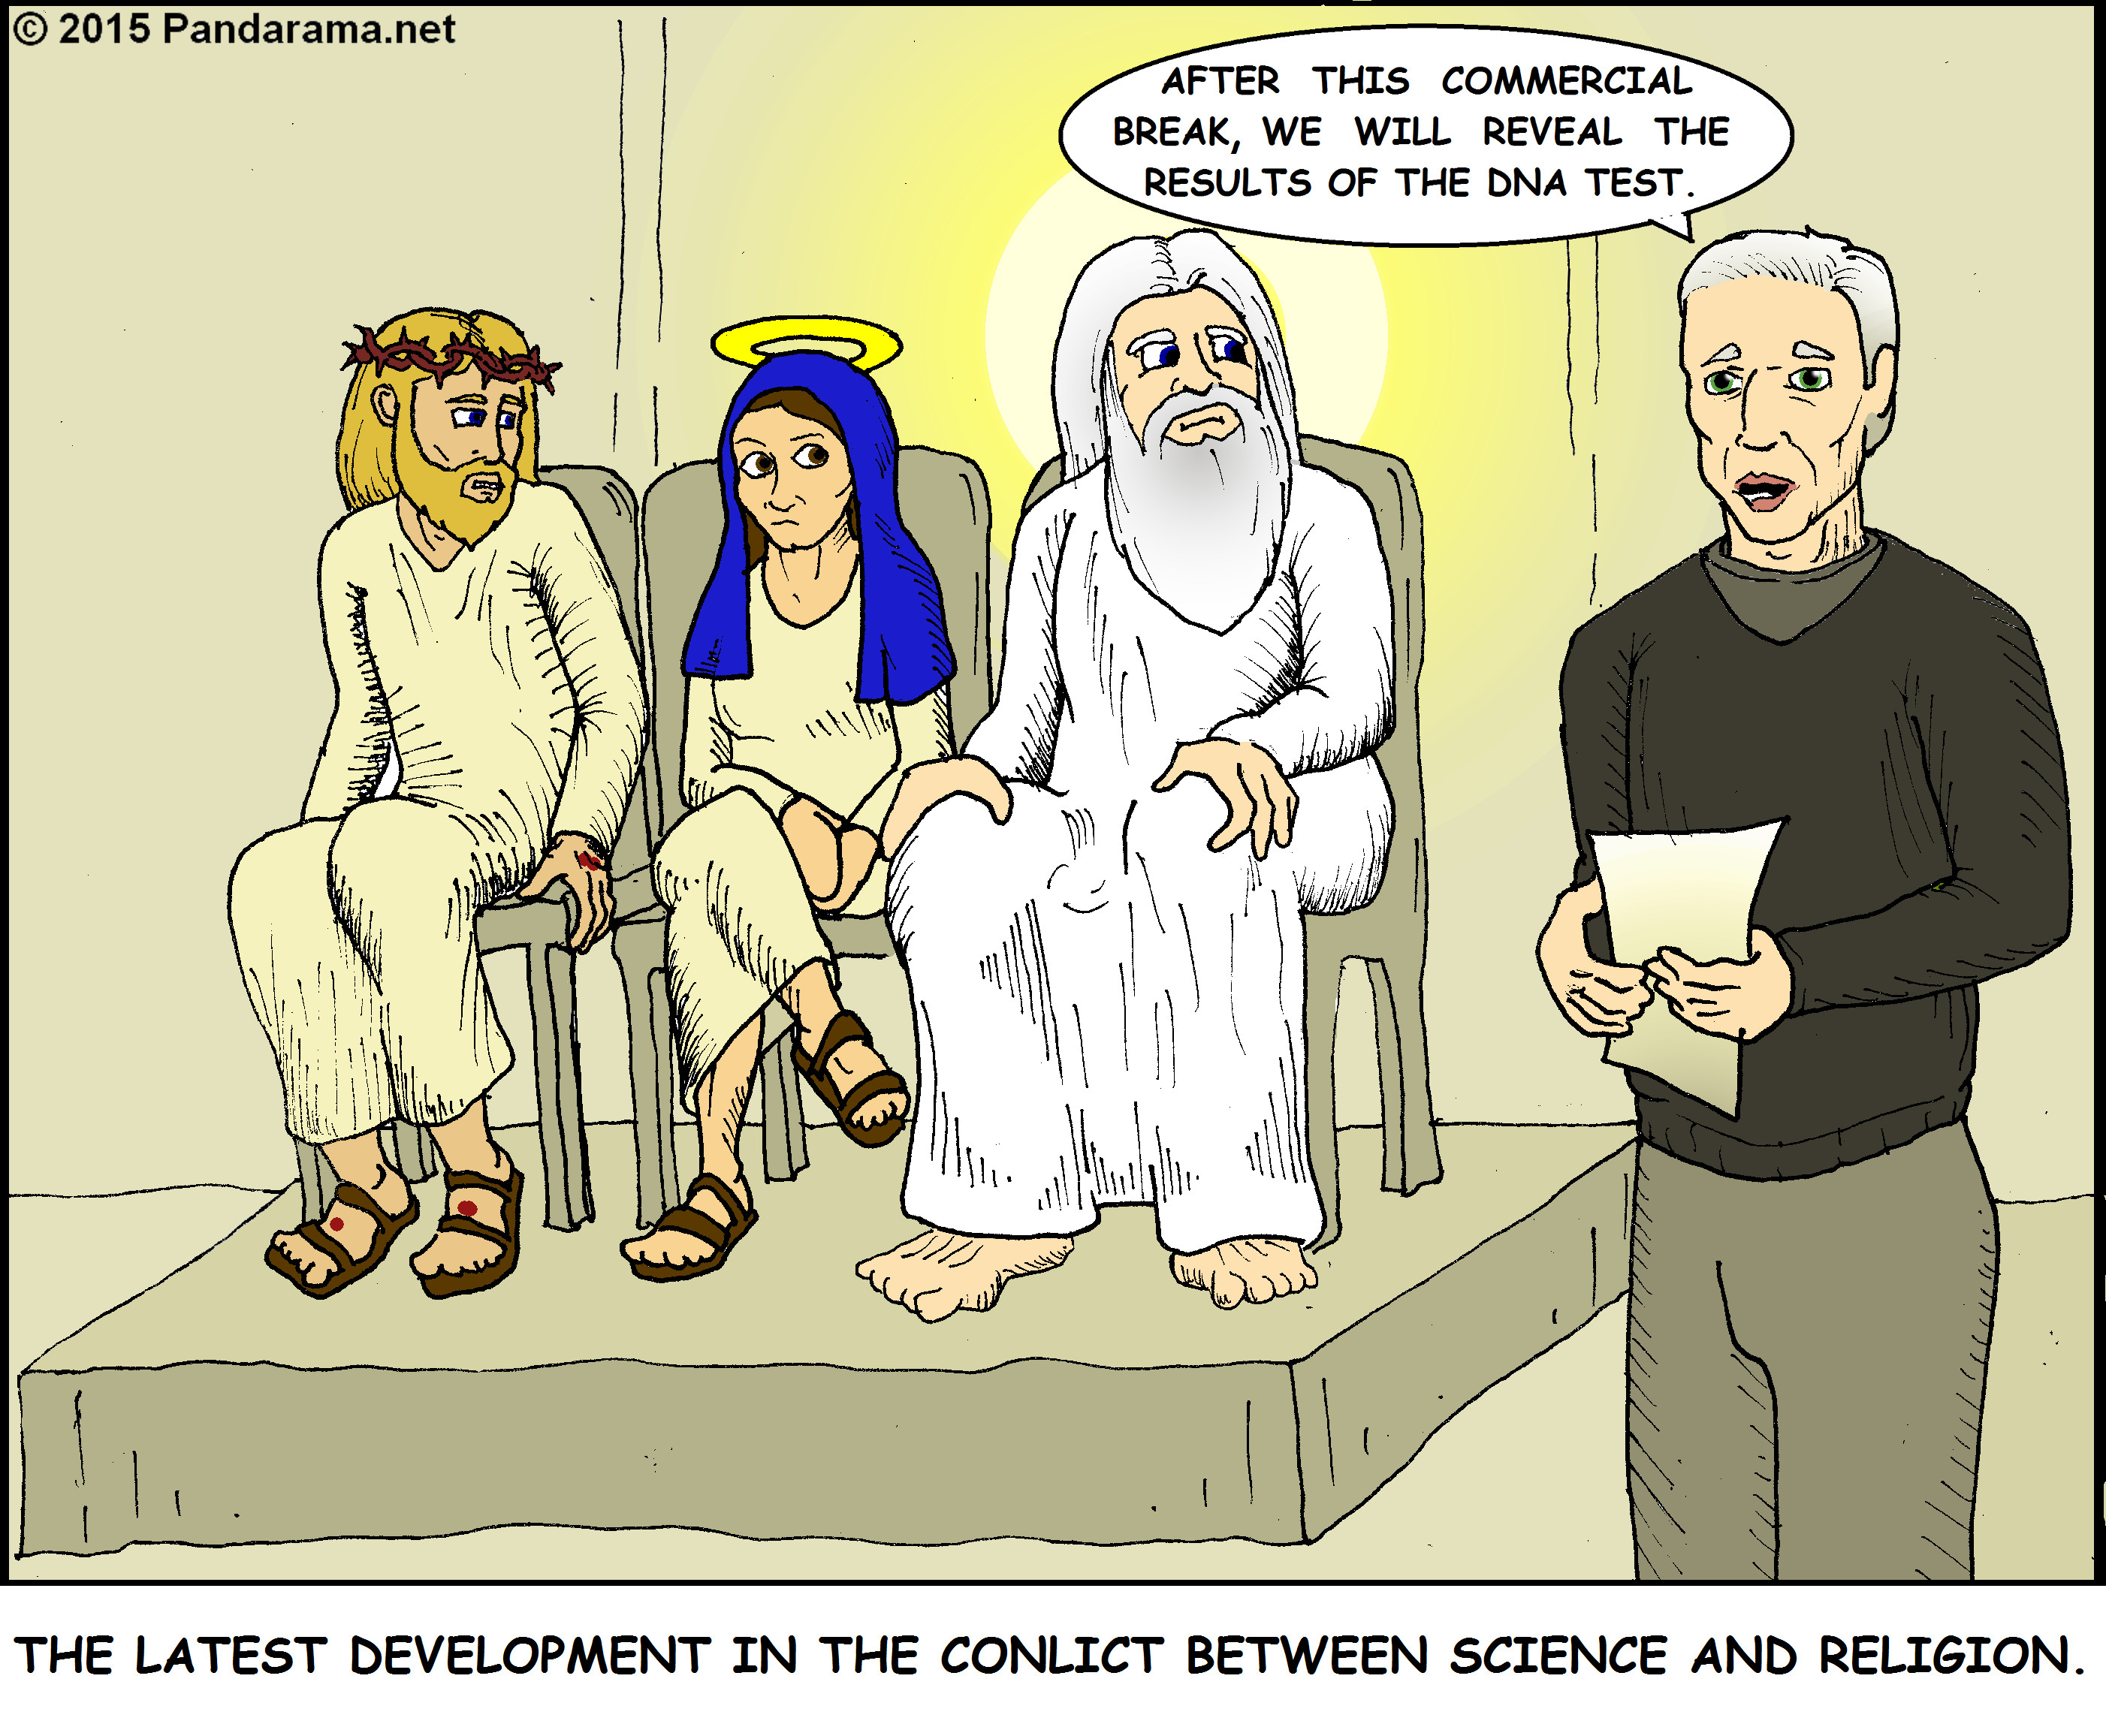 Pandarama / Pandarama.net satirical cartoon of Jesus's paternity subjected to DNA test on Maury Povich Show is the latest development in conflicct between science and religion.